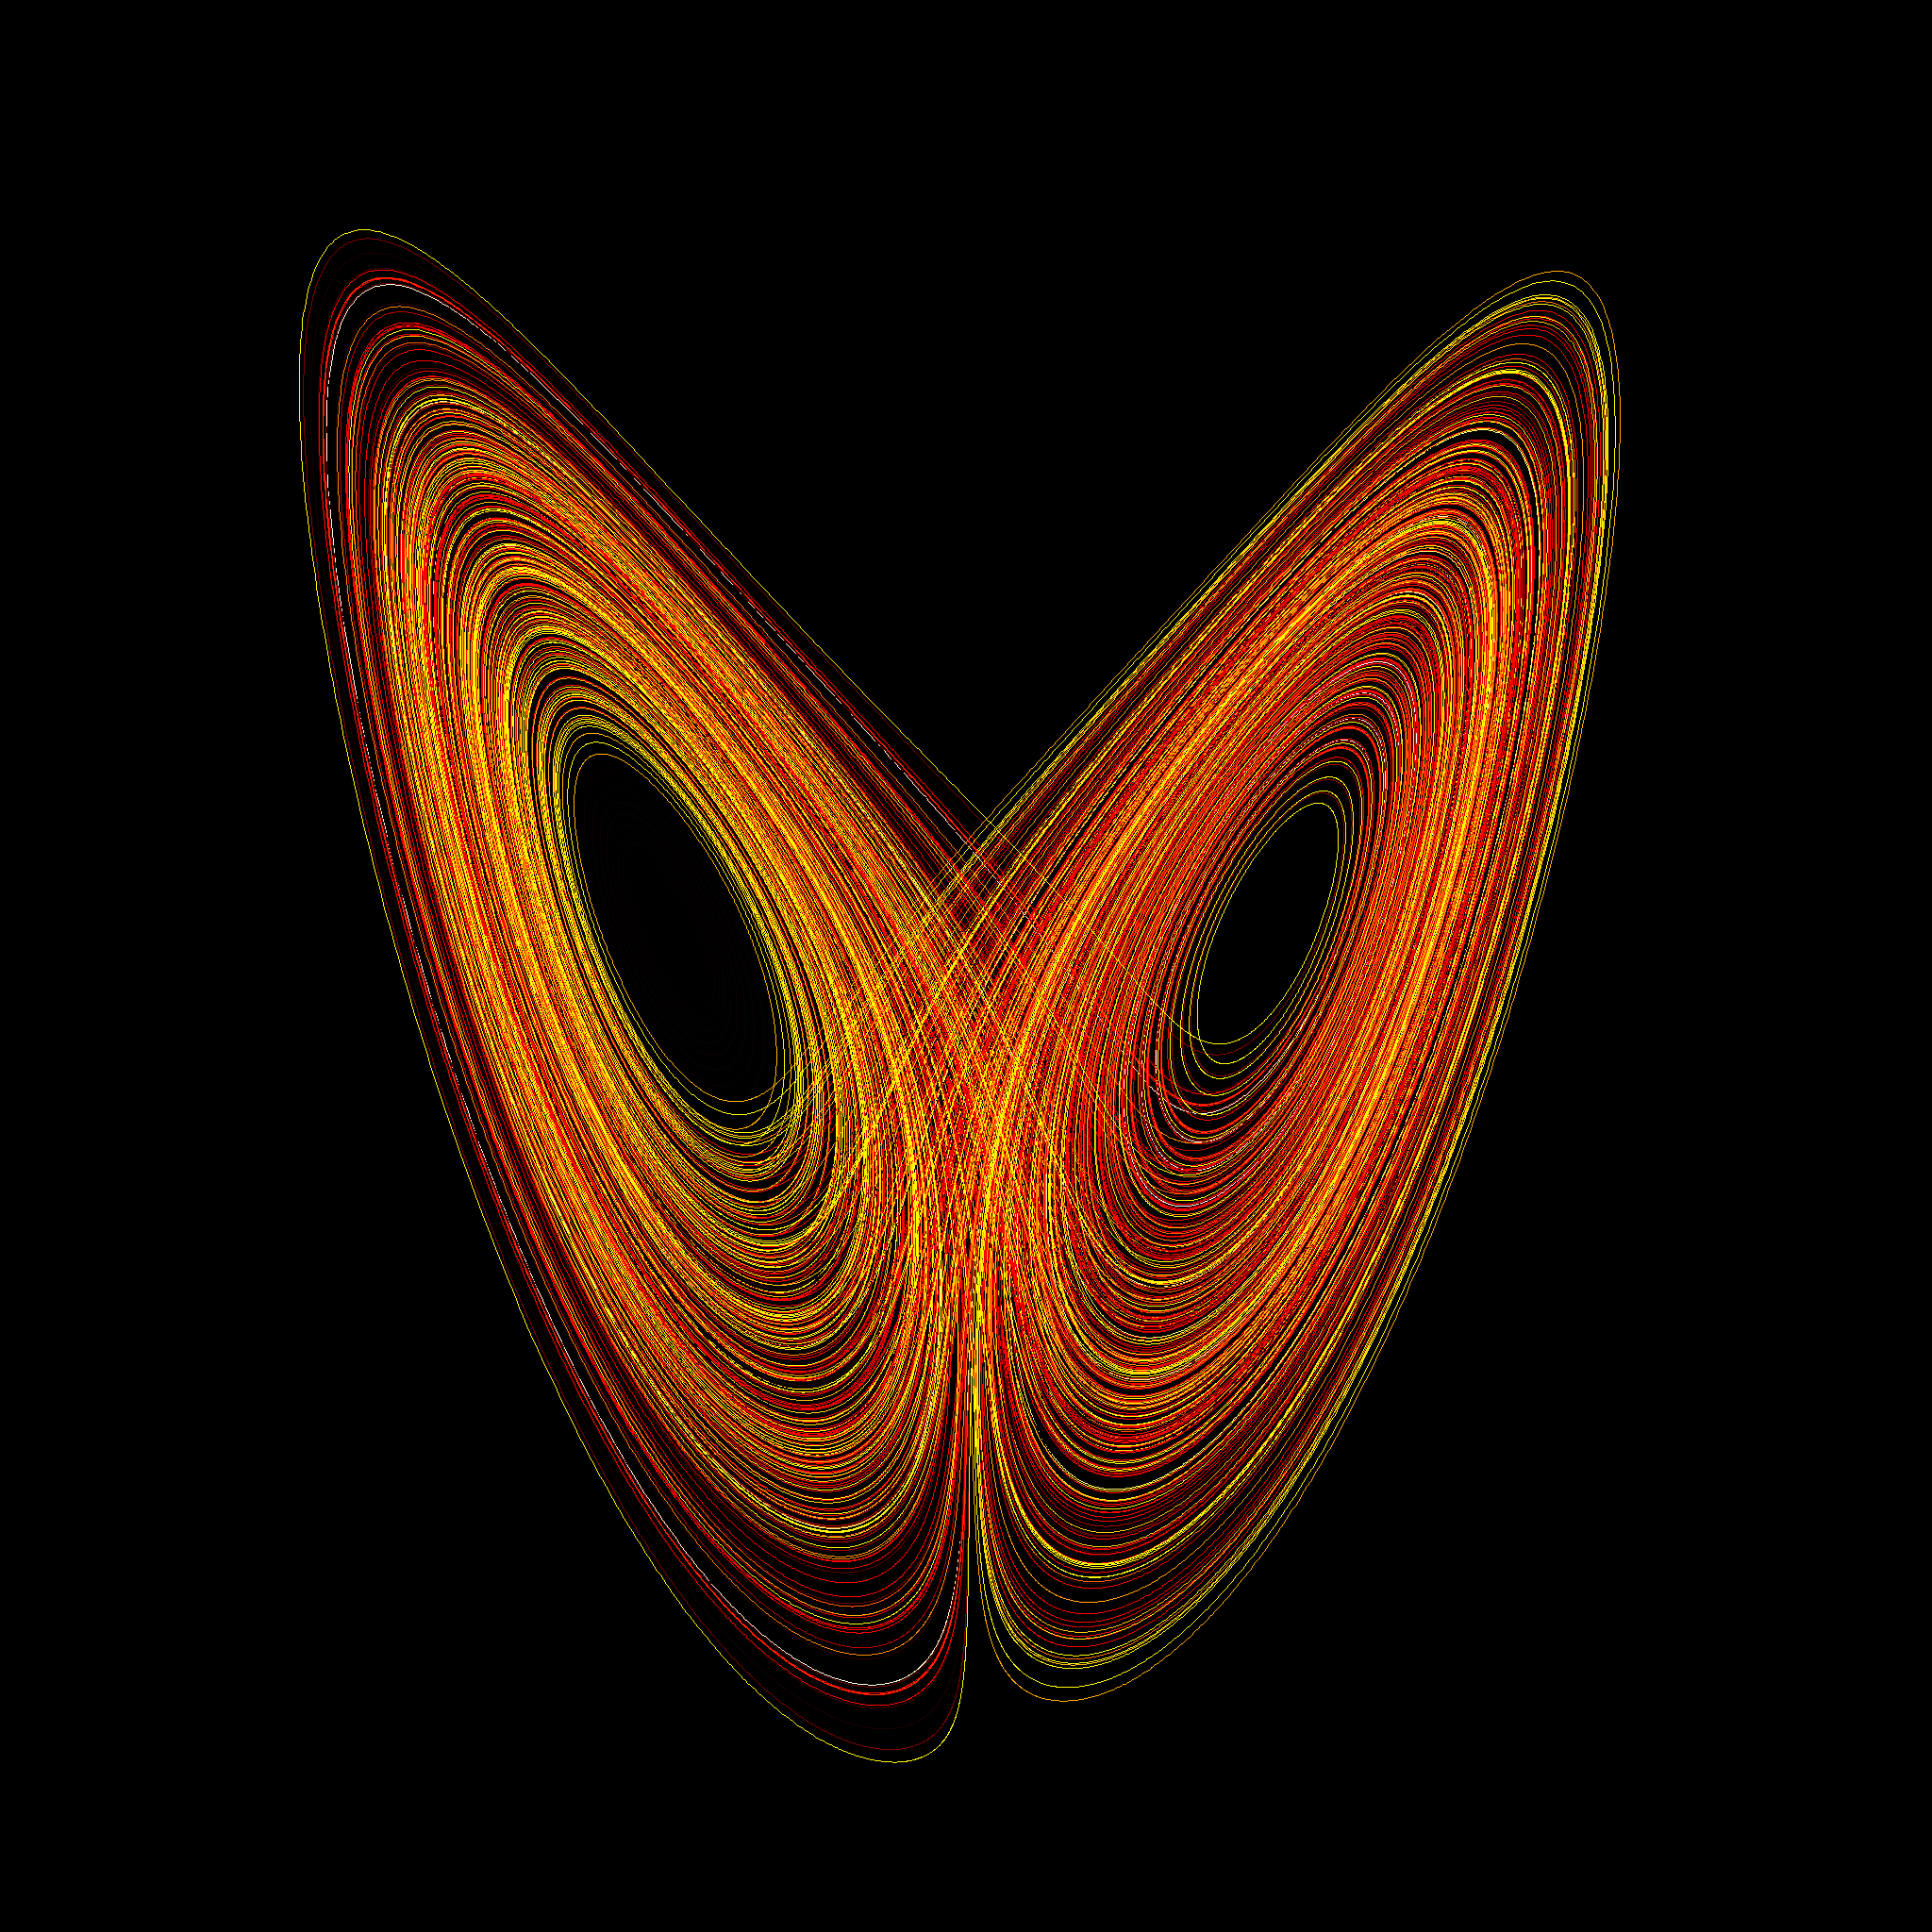 [Translate to English:] The Lorenz attractor, generated by a simplified version of the equations that sparked the discovery of modern chaos theory.